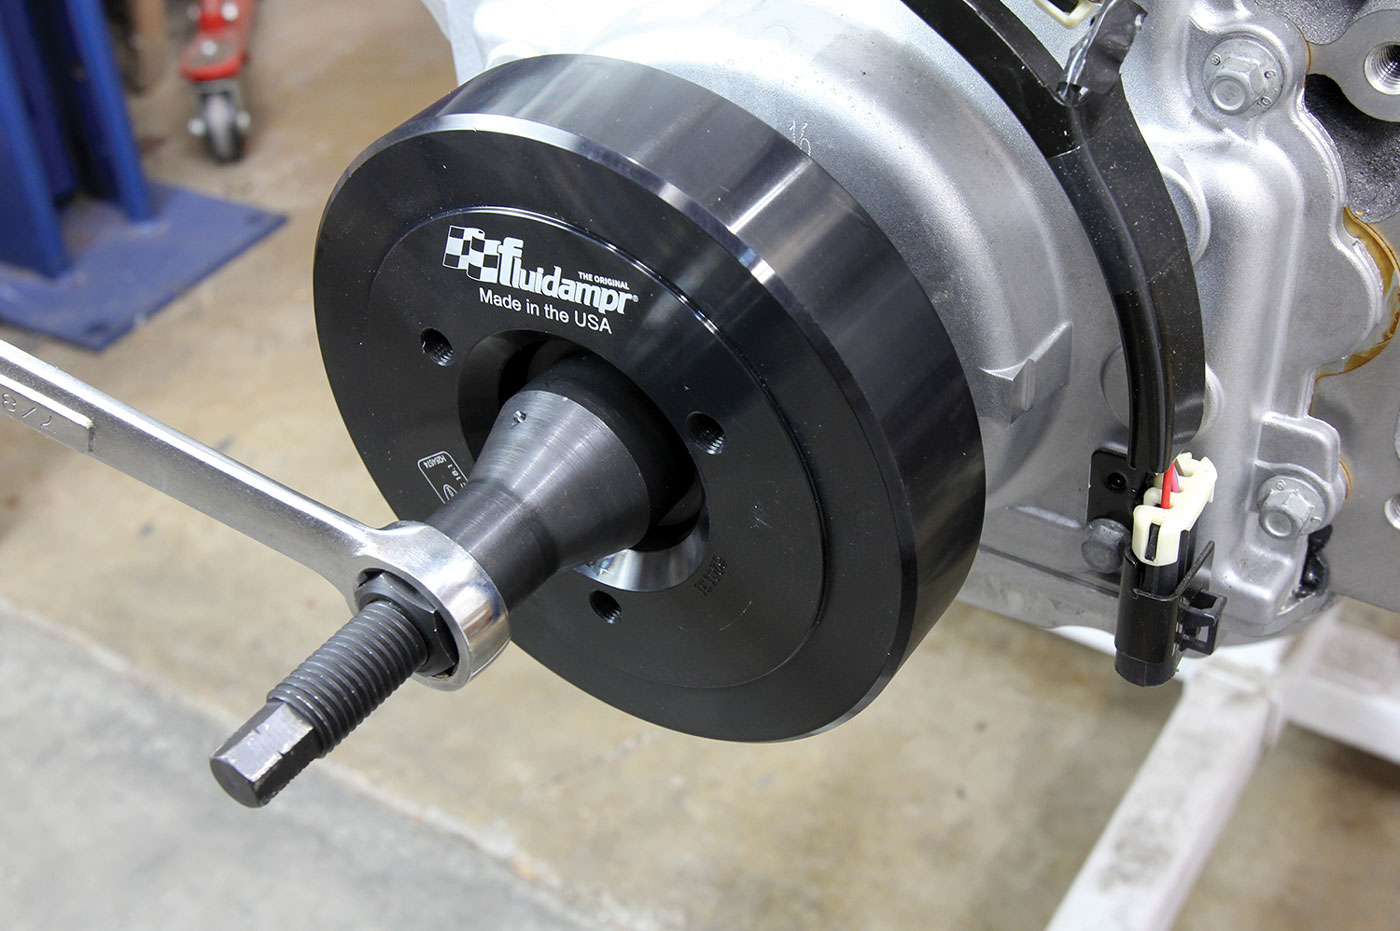 a Harmonic Balancer Installation Tool from Summit Racing (PN SUM-900135) is used to properly install the new damper